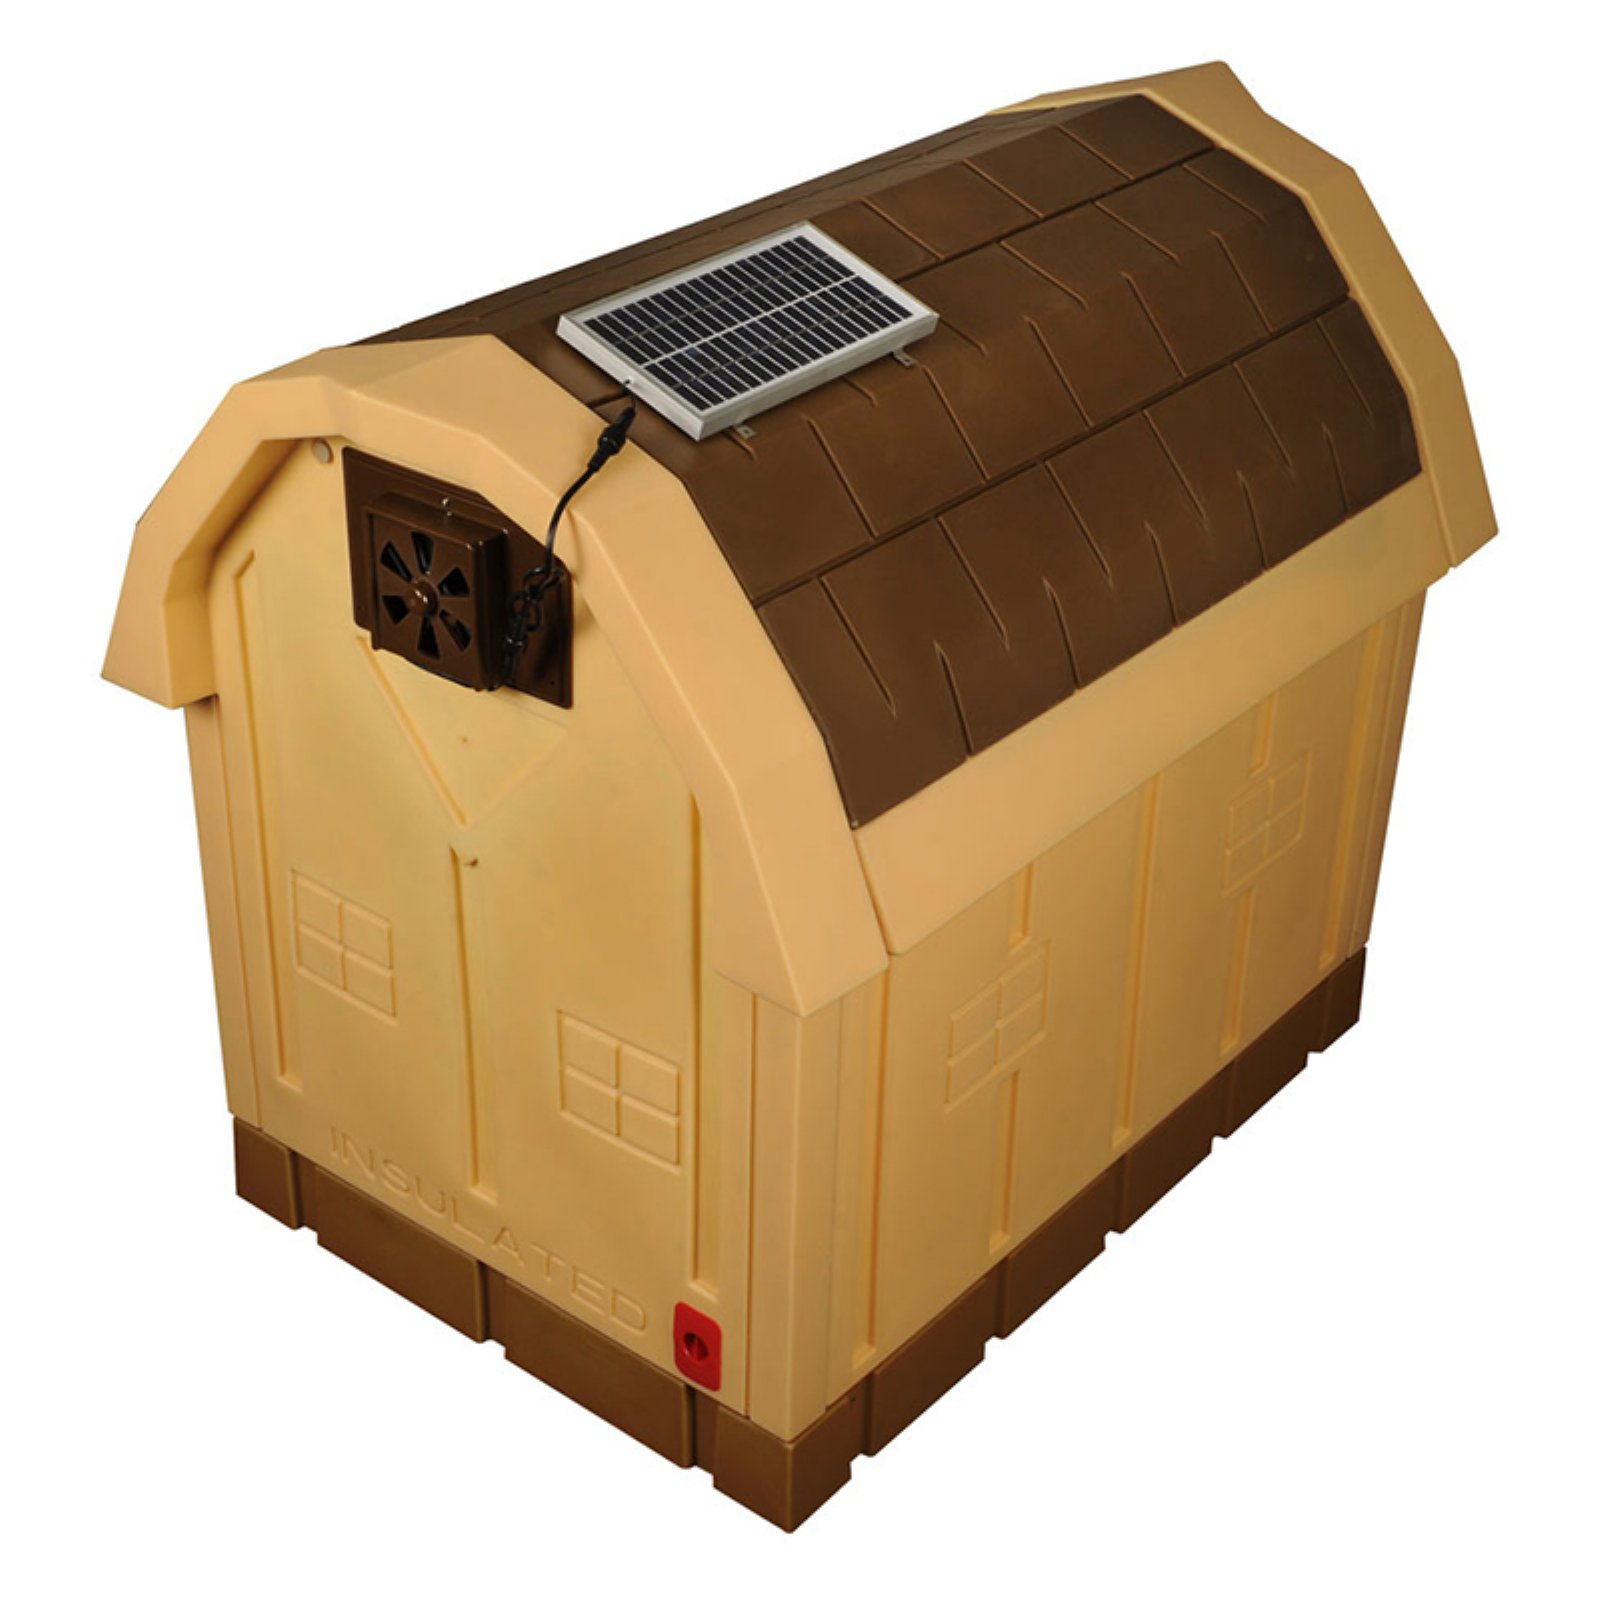 Dog Palace Breeze Solar Powered Exhaust Fan for Dog House, Large - image 4 of 6